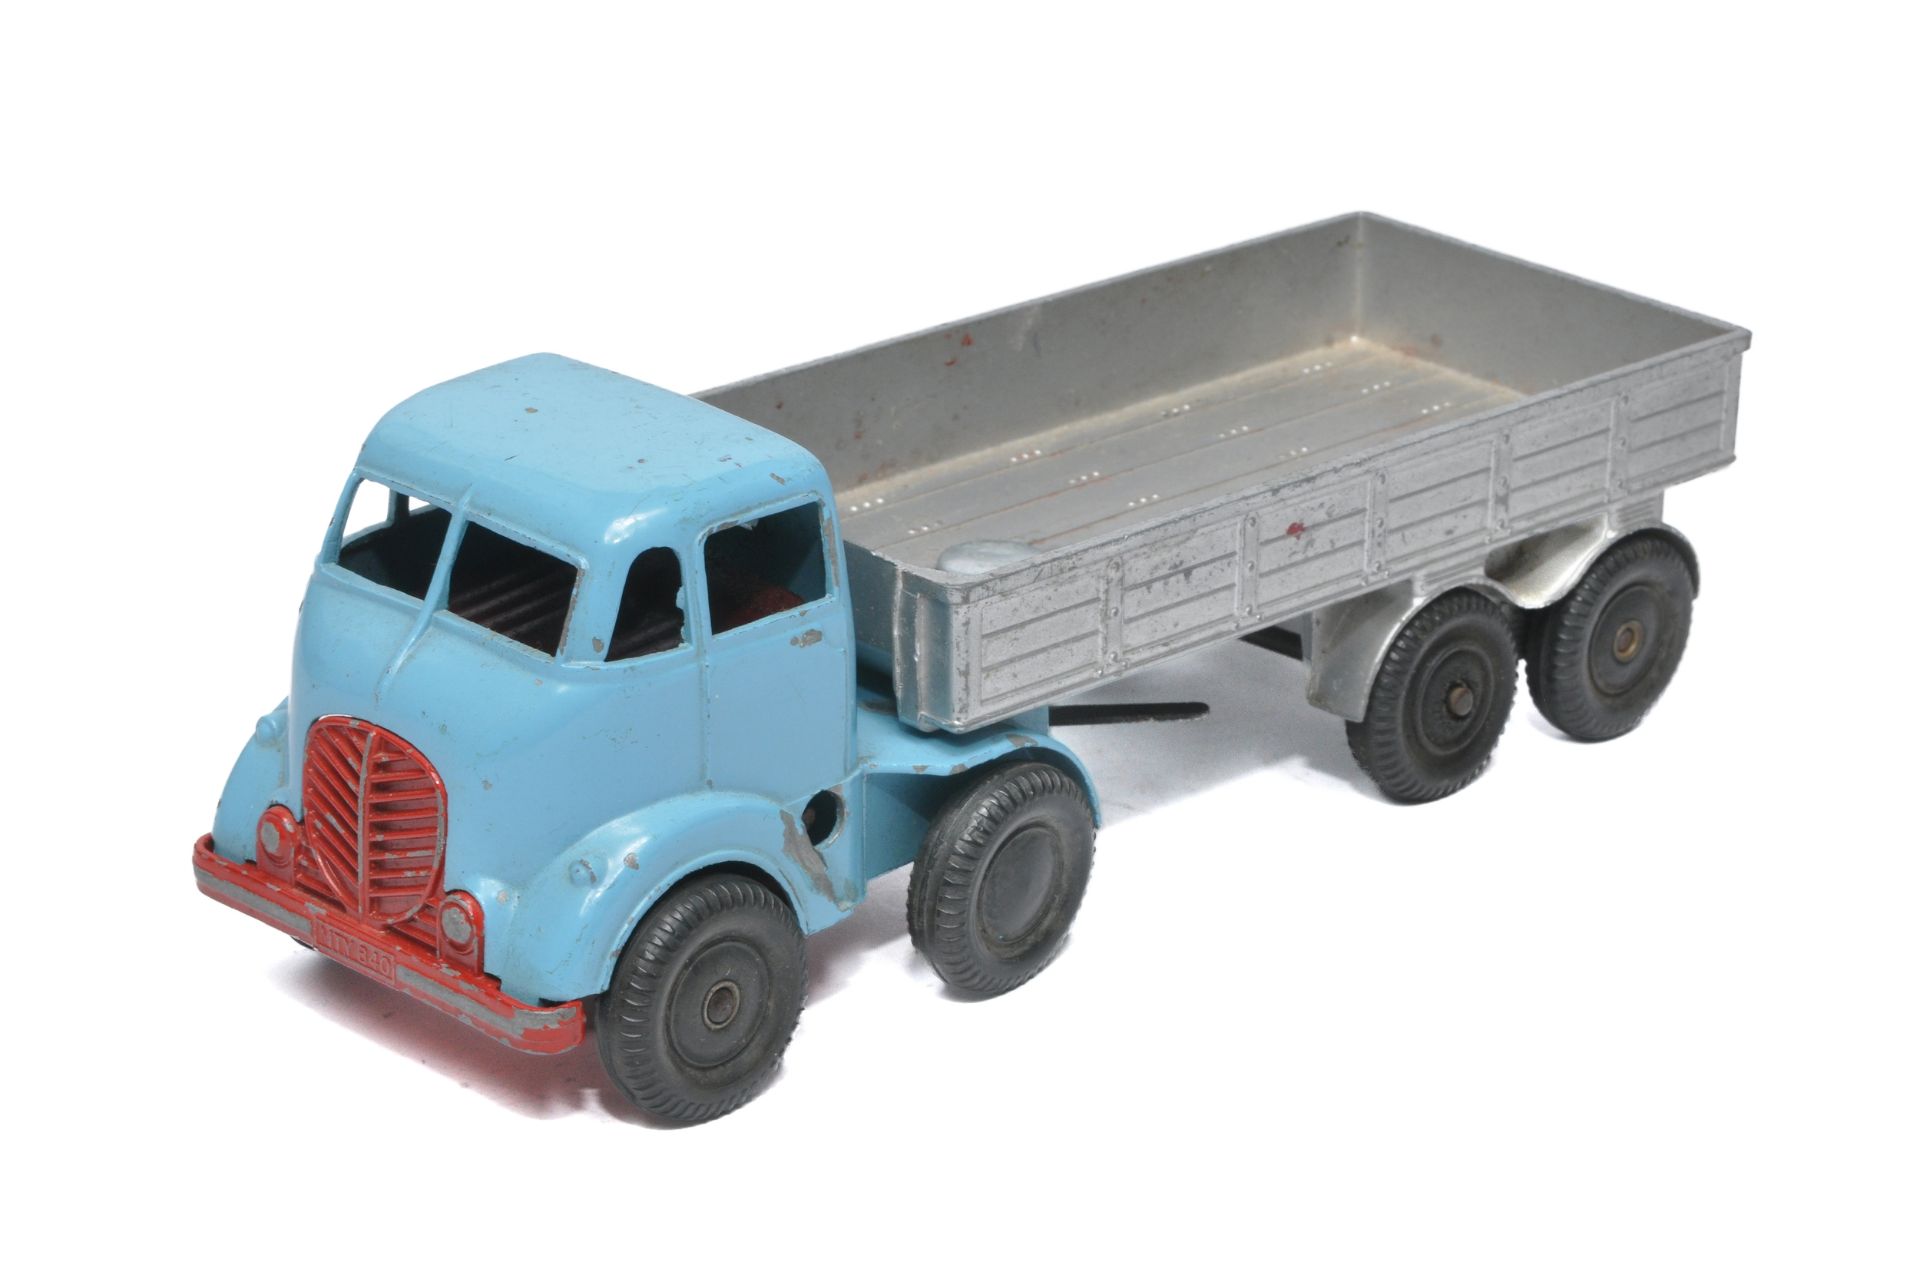 Mettoy Castoys mechanical articulated lorry. Light blue cab, with red grille, base & interior,